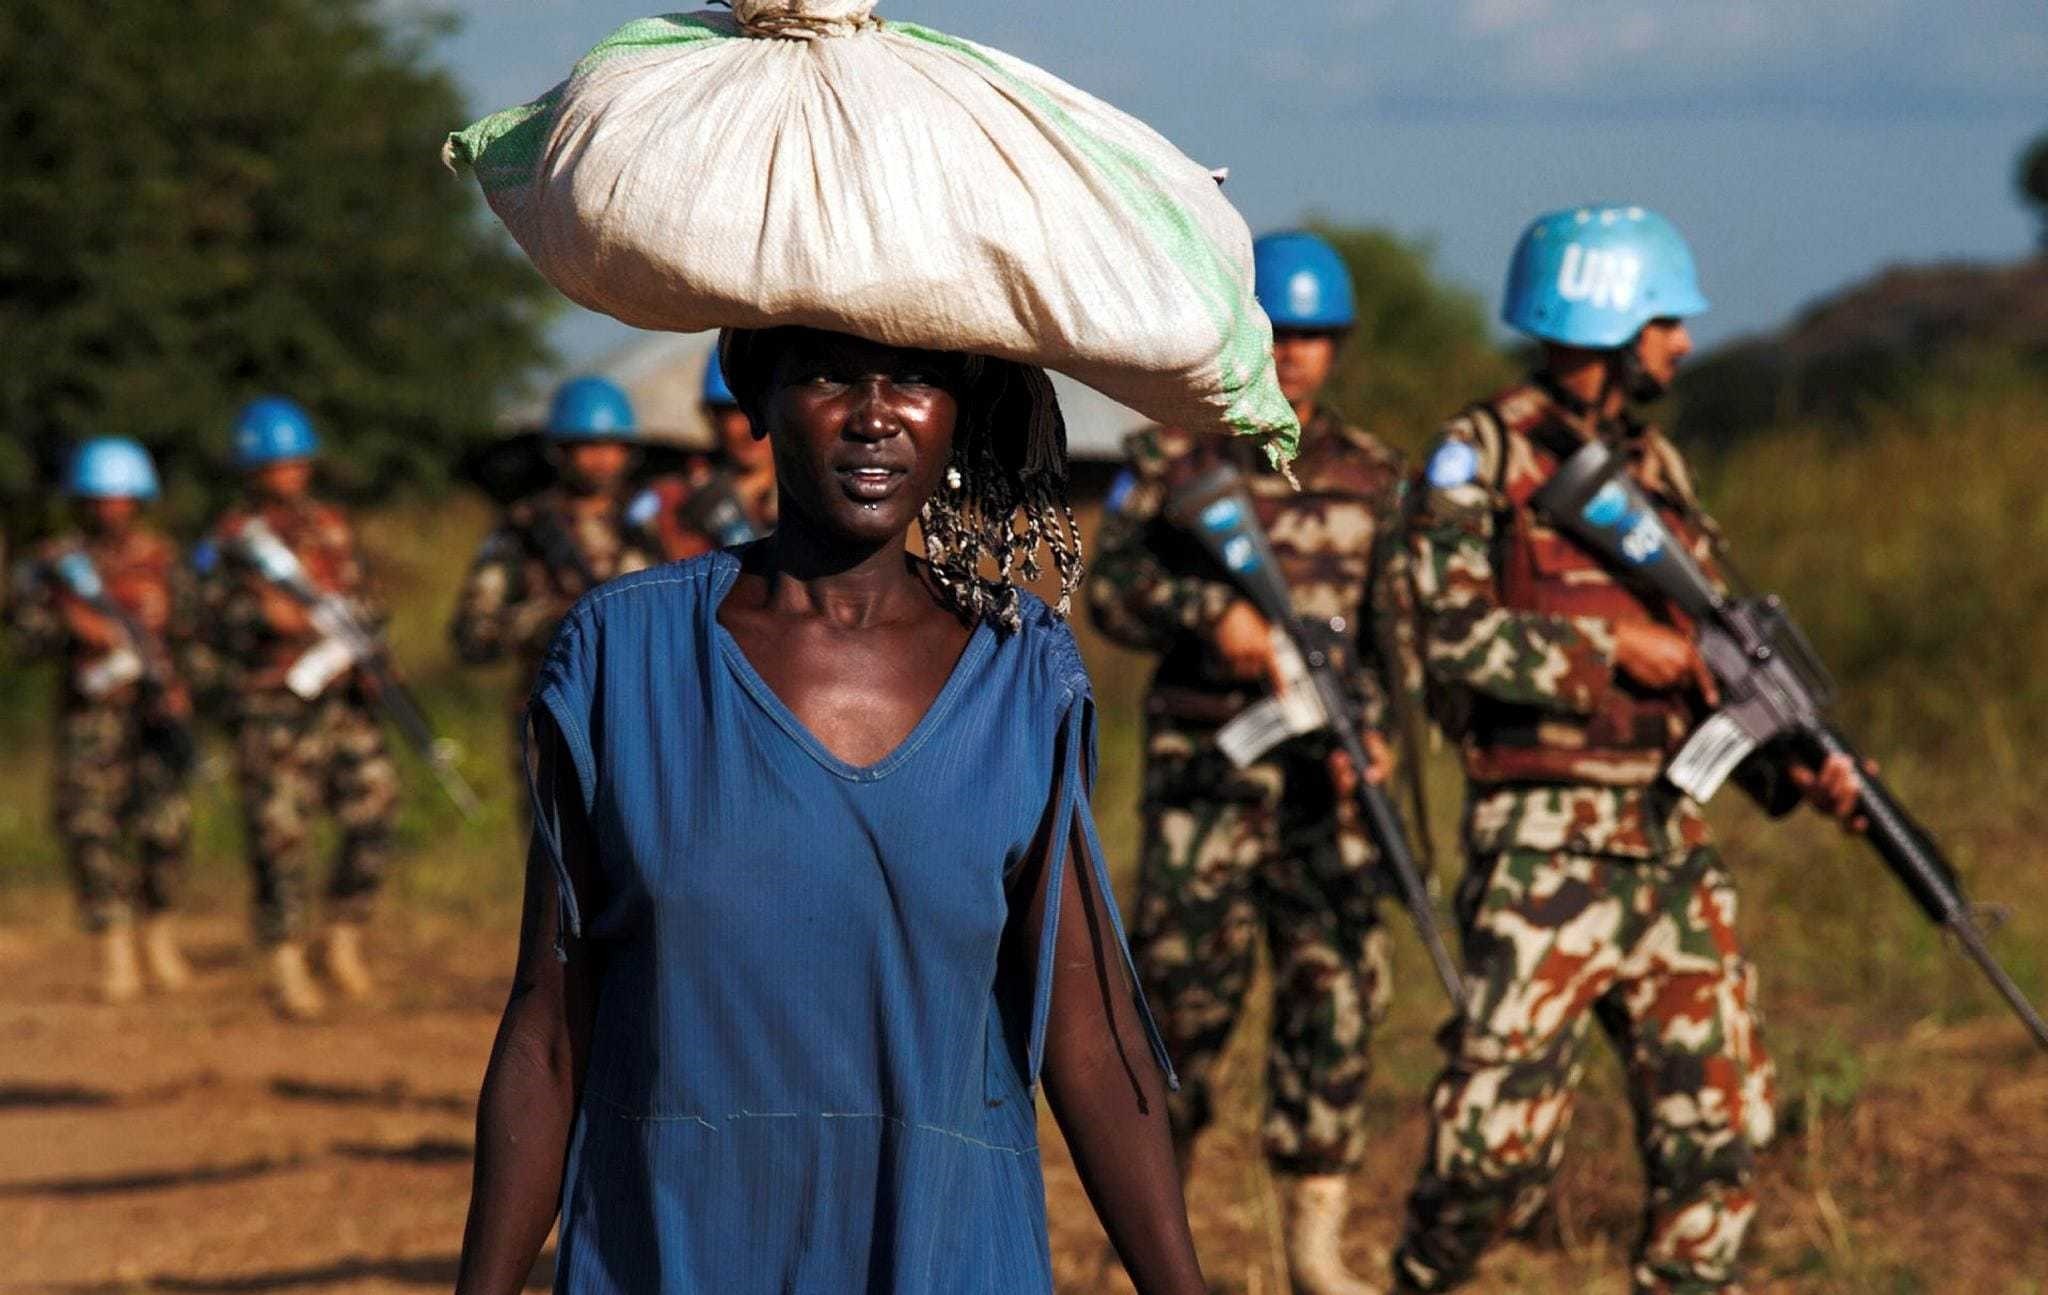 A displaced woman carrying goods as United Nations Mission in South Sudan (UNMISS) peacekeepers patrol outside the premises of the UN Protection of Civilians (PoC) site in Juba.